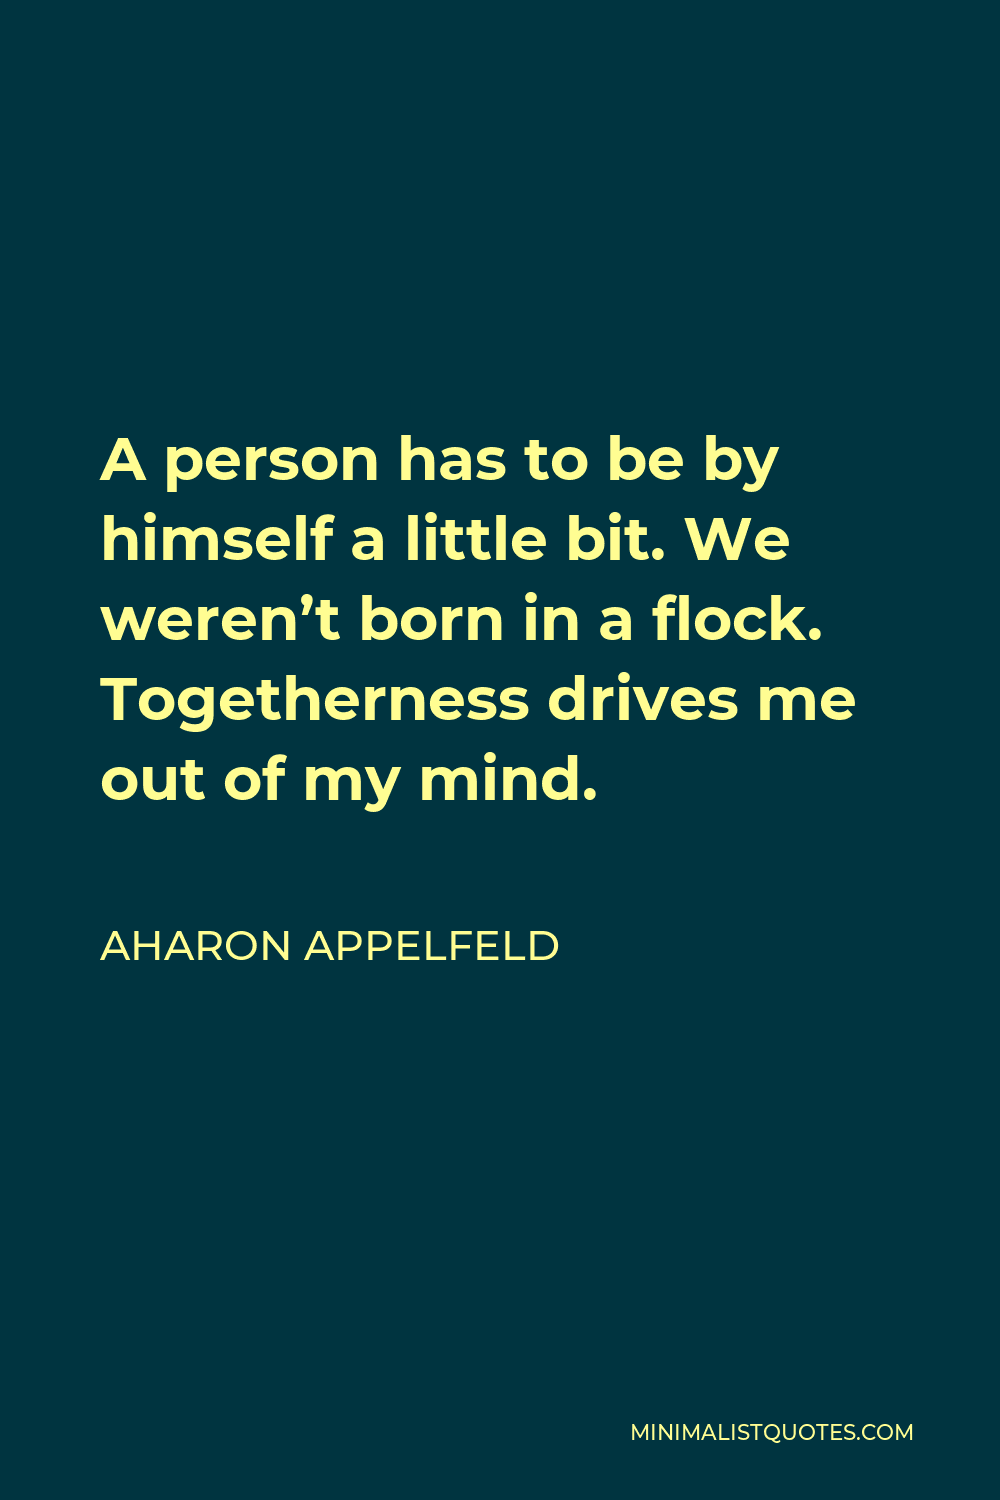 Aharon Appelfeld Quote - A person has to be by himself a little bit. We weren’t born in a flock. Togetherness drives me out of my mind.